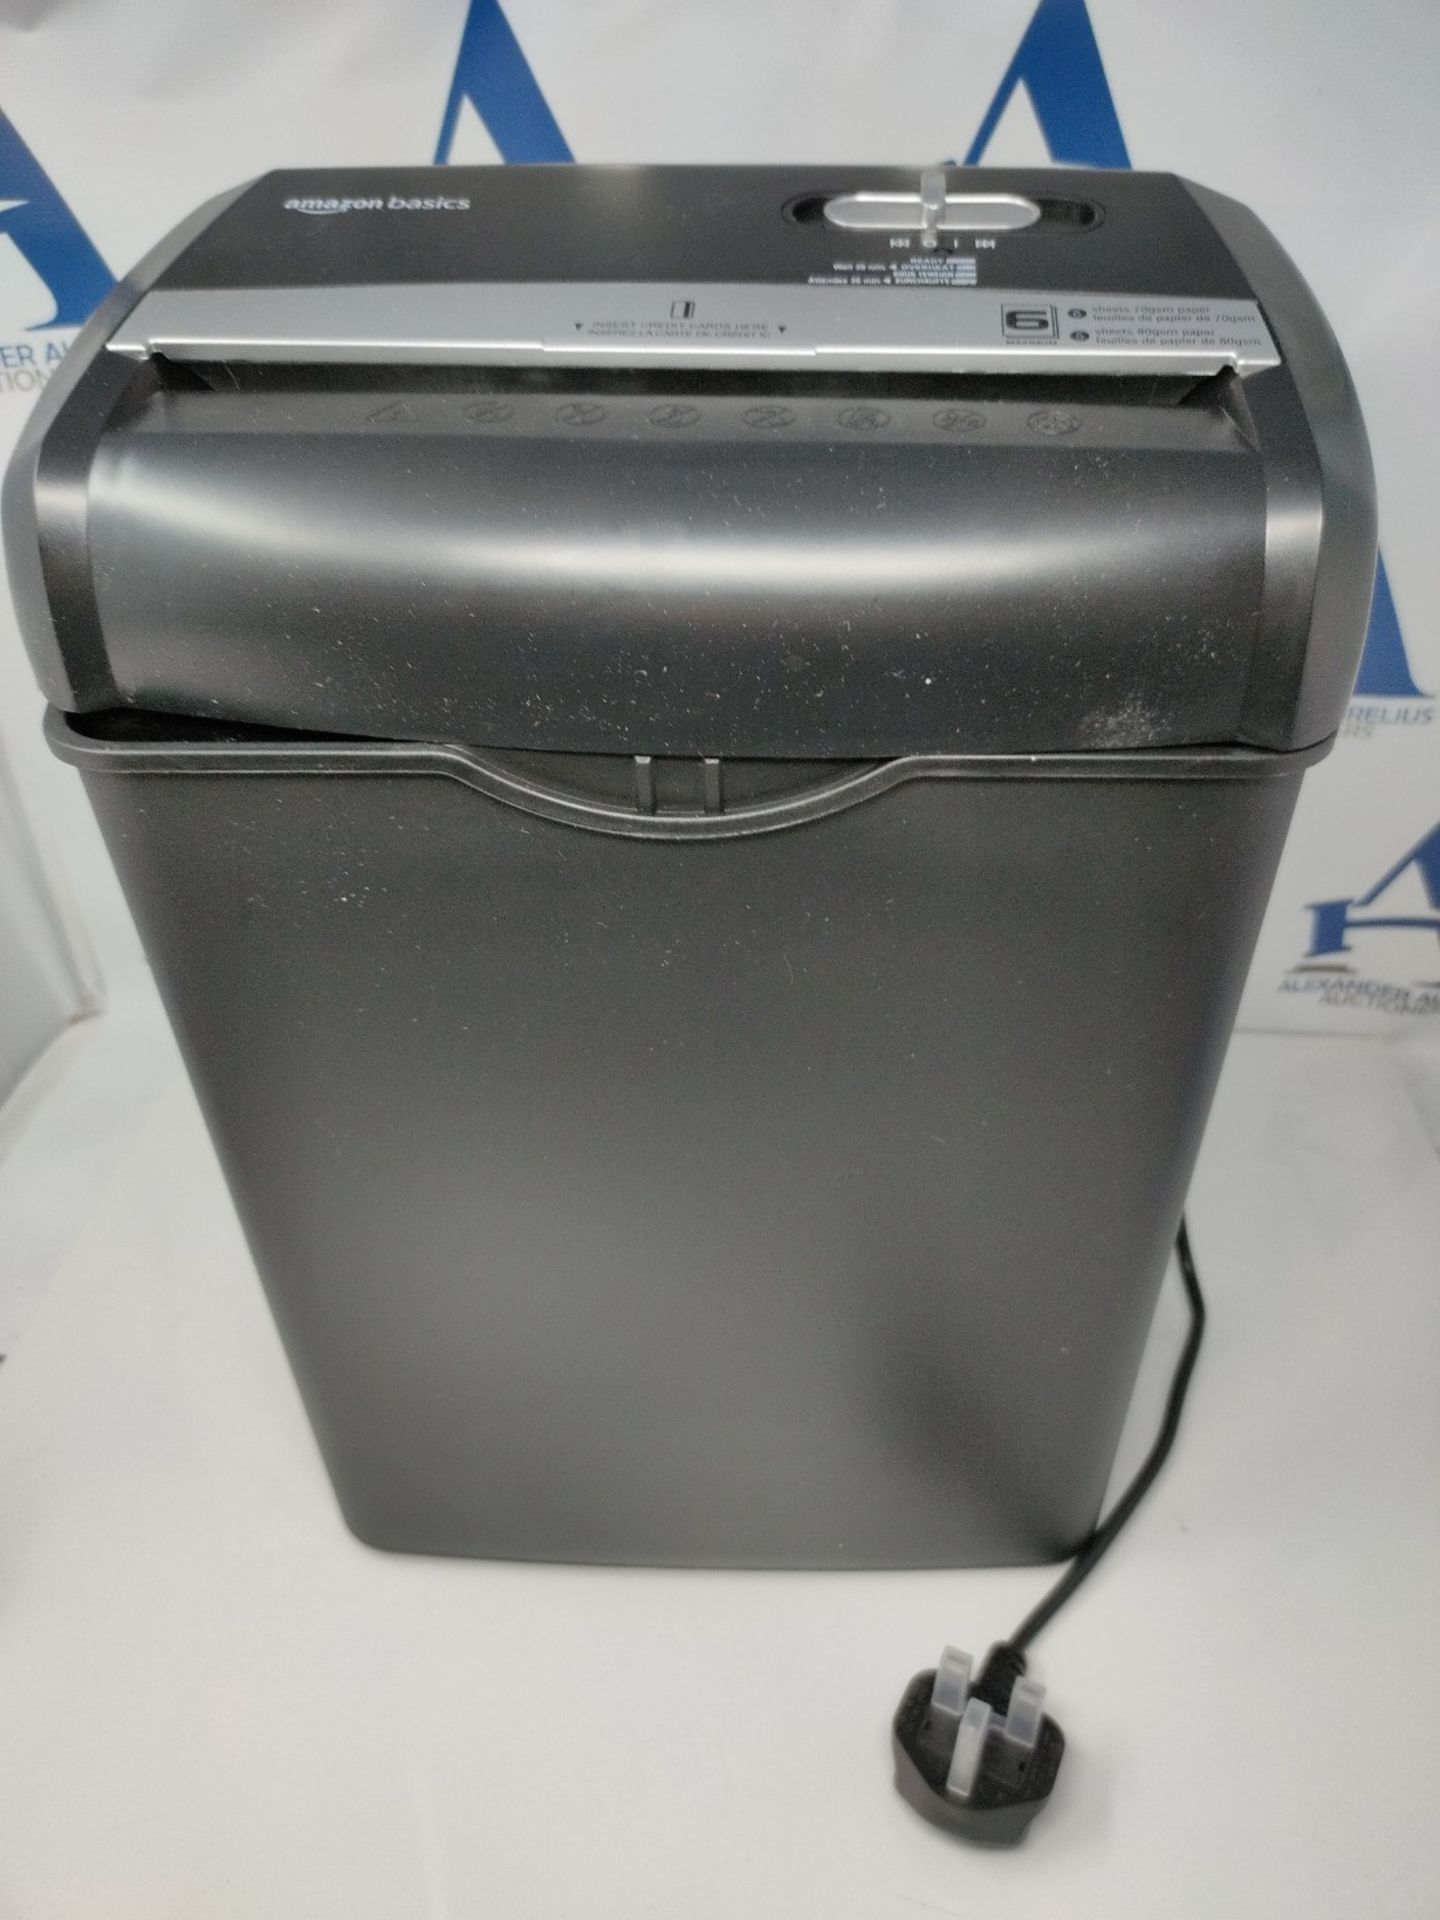 Amazon Basics 5-6 Sheet Cross-Cut Paper and Credit Card Shredder with 14.3L Bin for Bu - Image 2 of 3